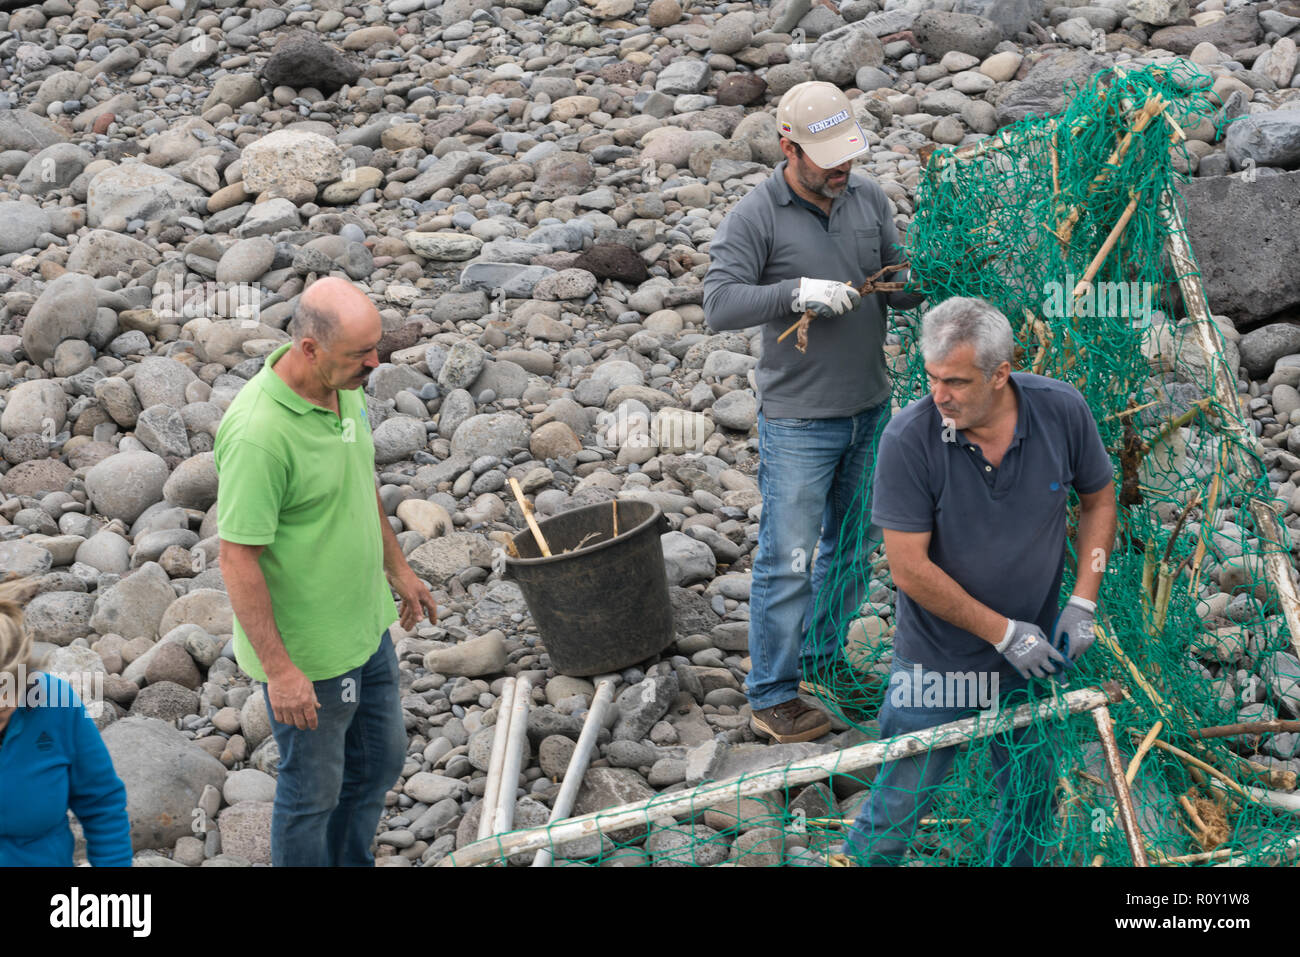 Local volunteer people cleaning the beach after a storm in Ponta do Sol, Madeira Stock Photo